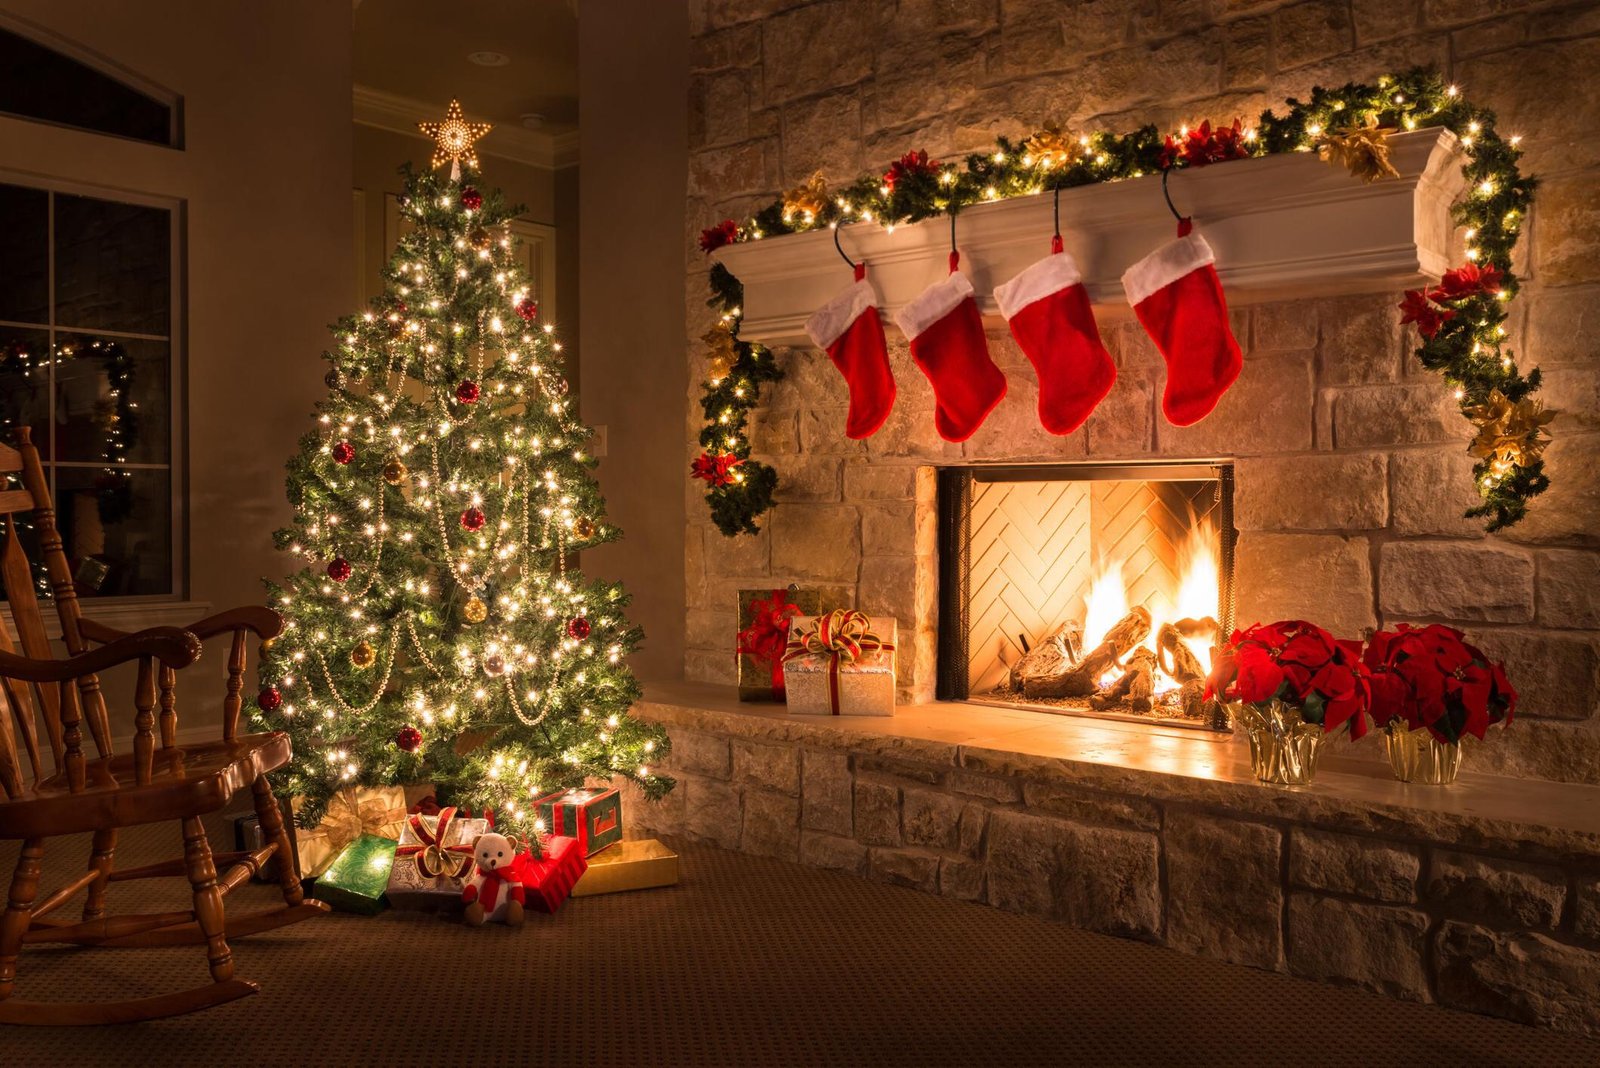 Christmas-decorated living room with a glowing fireplace, stockings, and a tree.